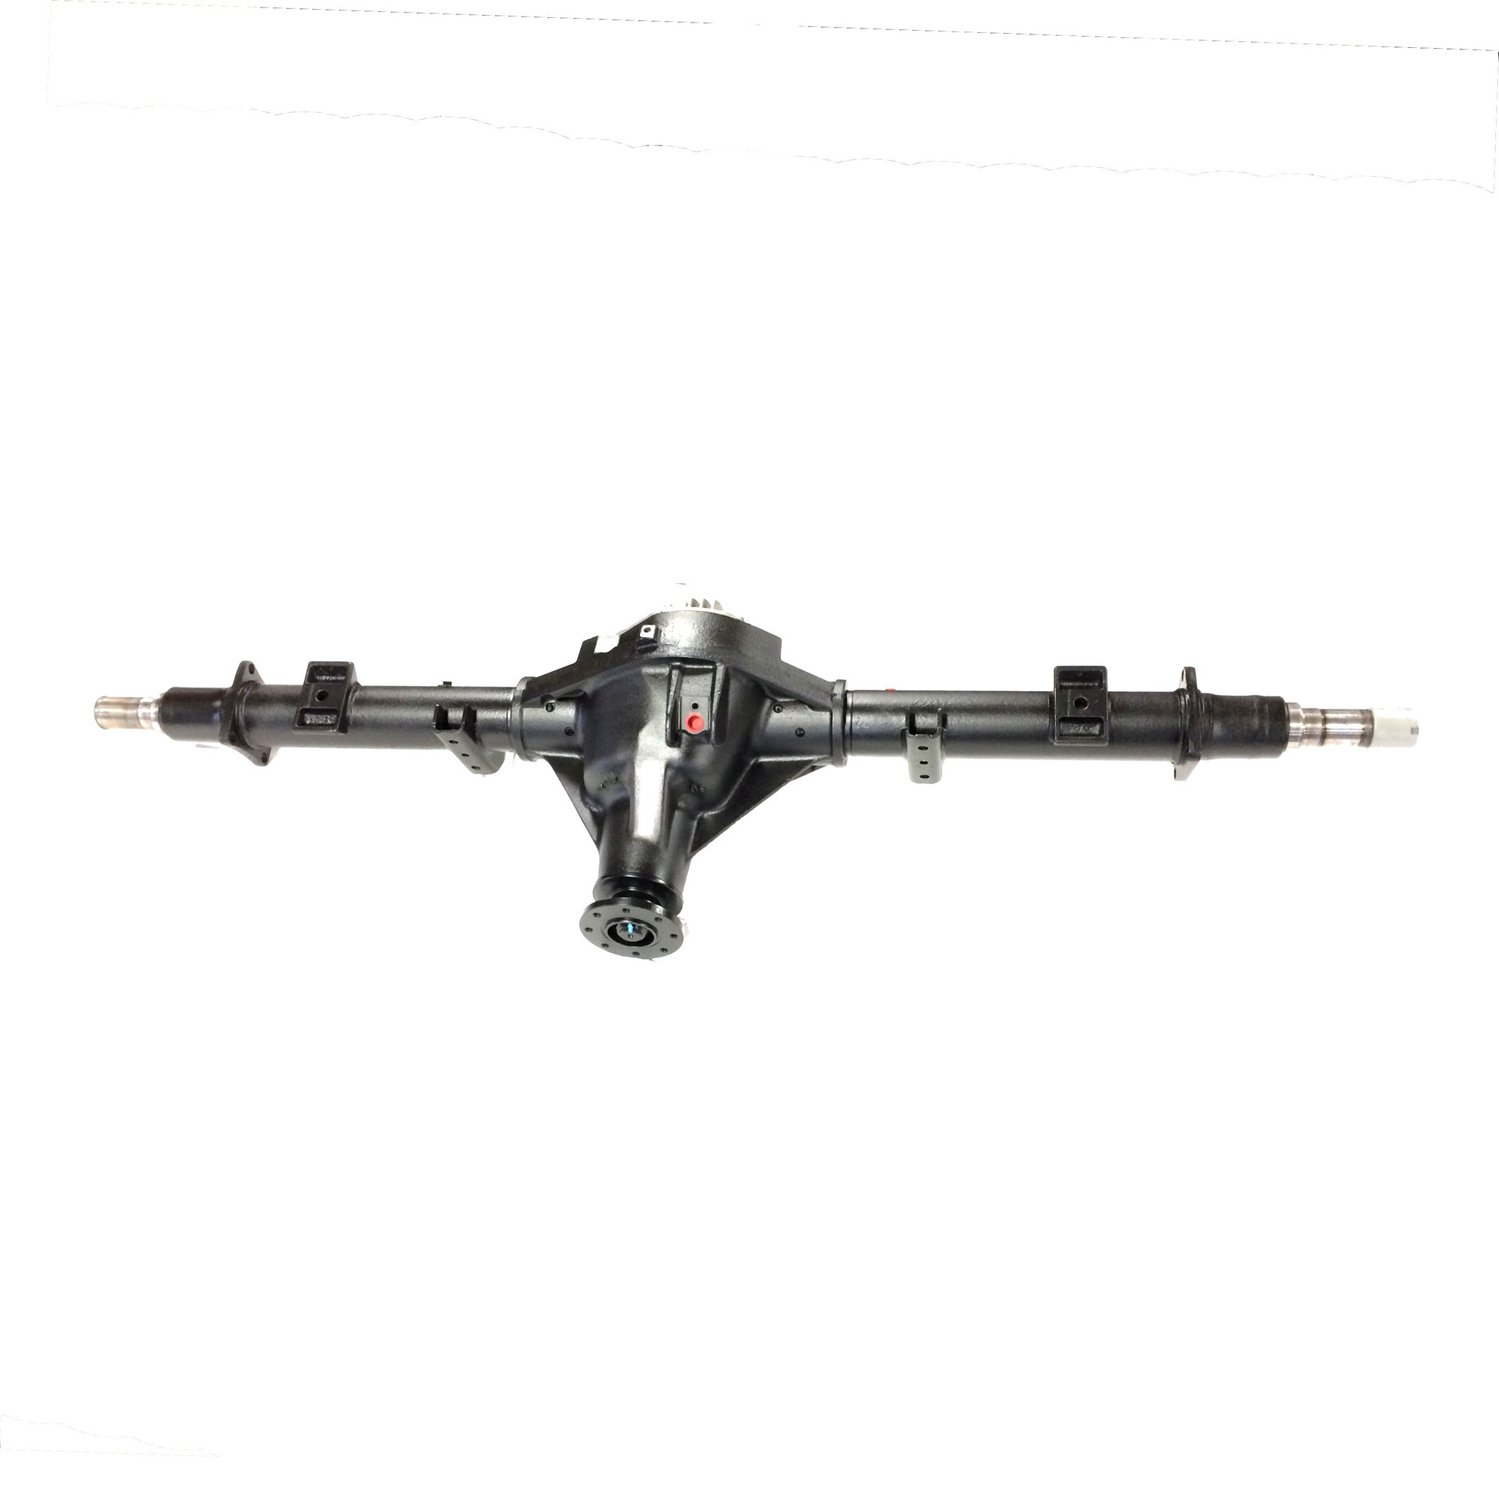 Remanufactured Axle Assy for Dana 80 08-12 F350, DRW, 4.30, Posi LSD, Non-Cab Chassis